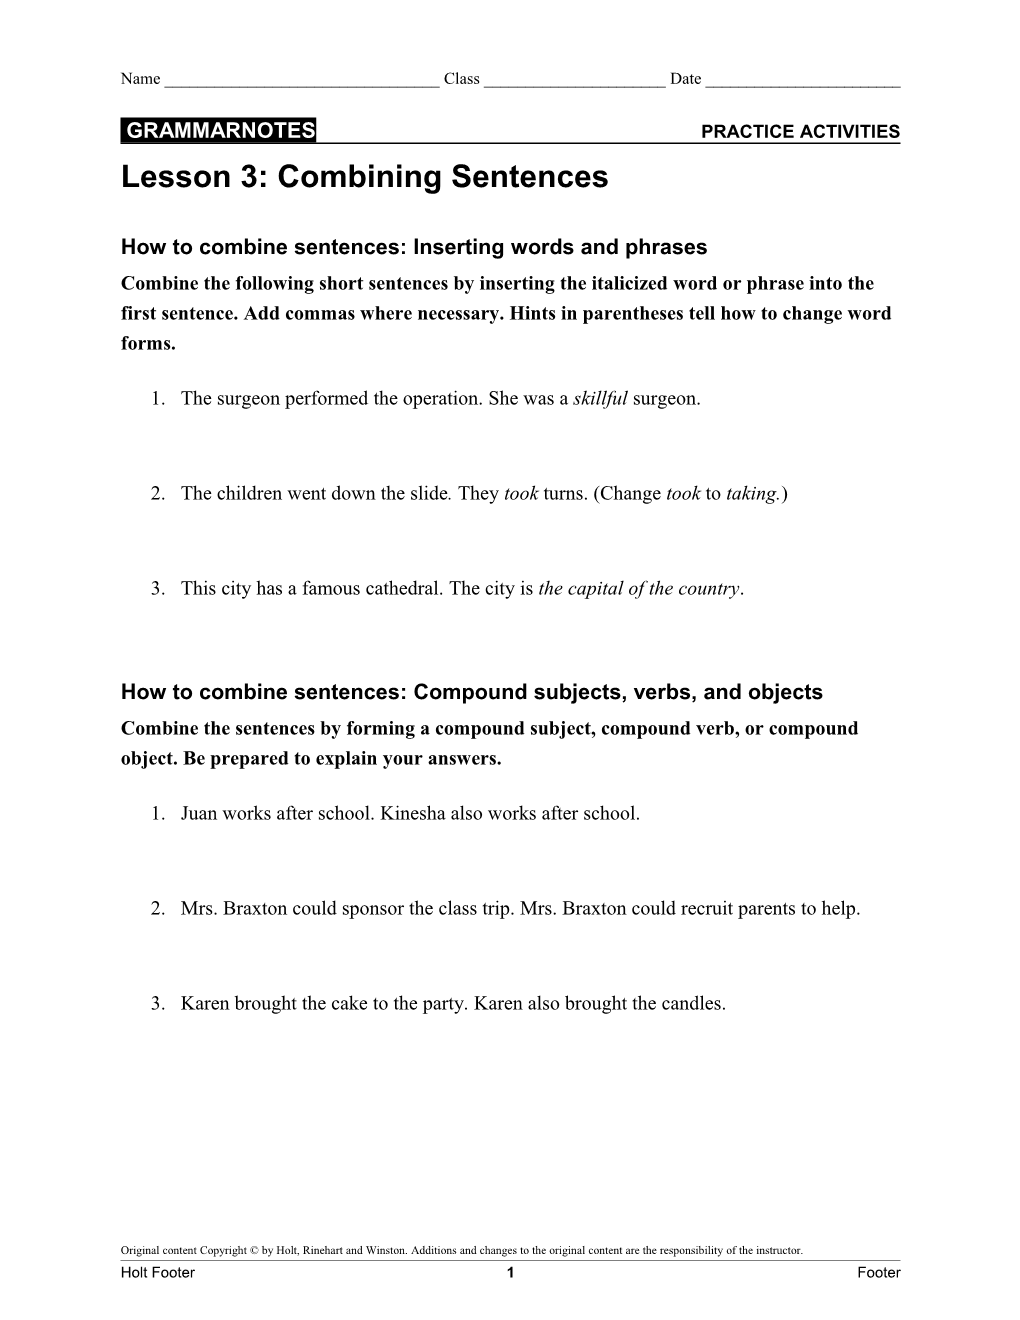 How to Combine Sentences: Inserting Words and Phrases